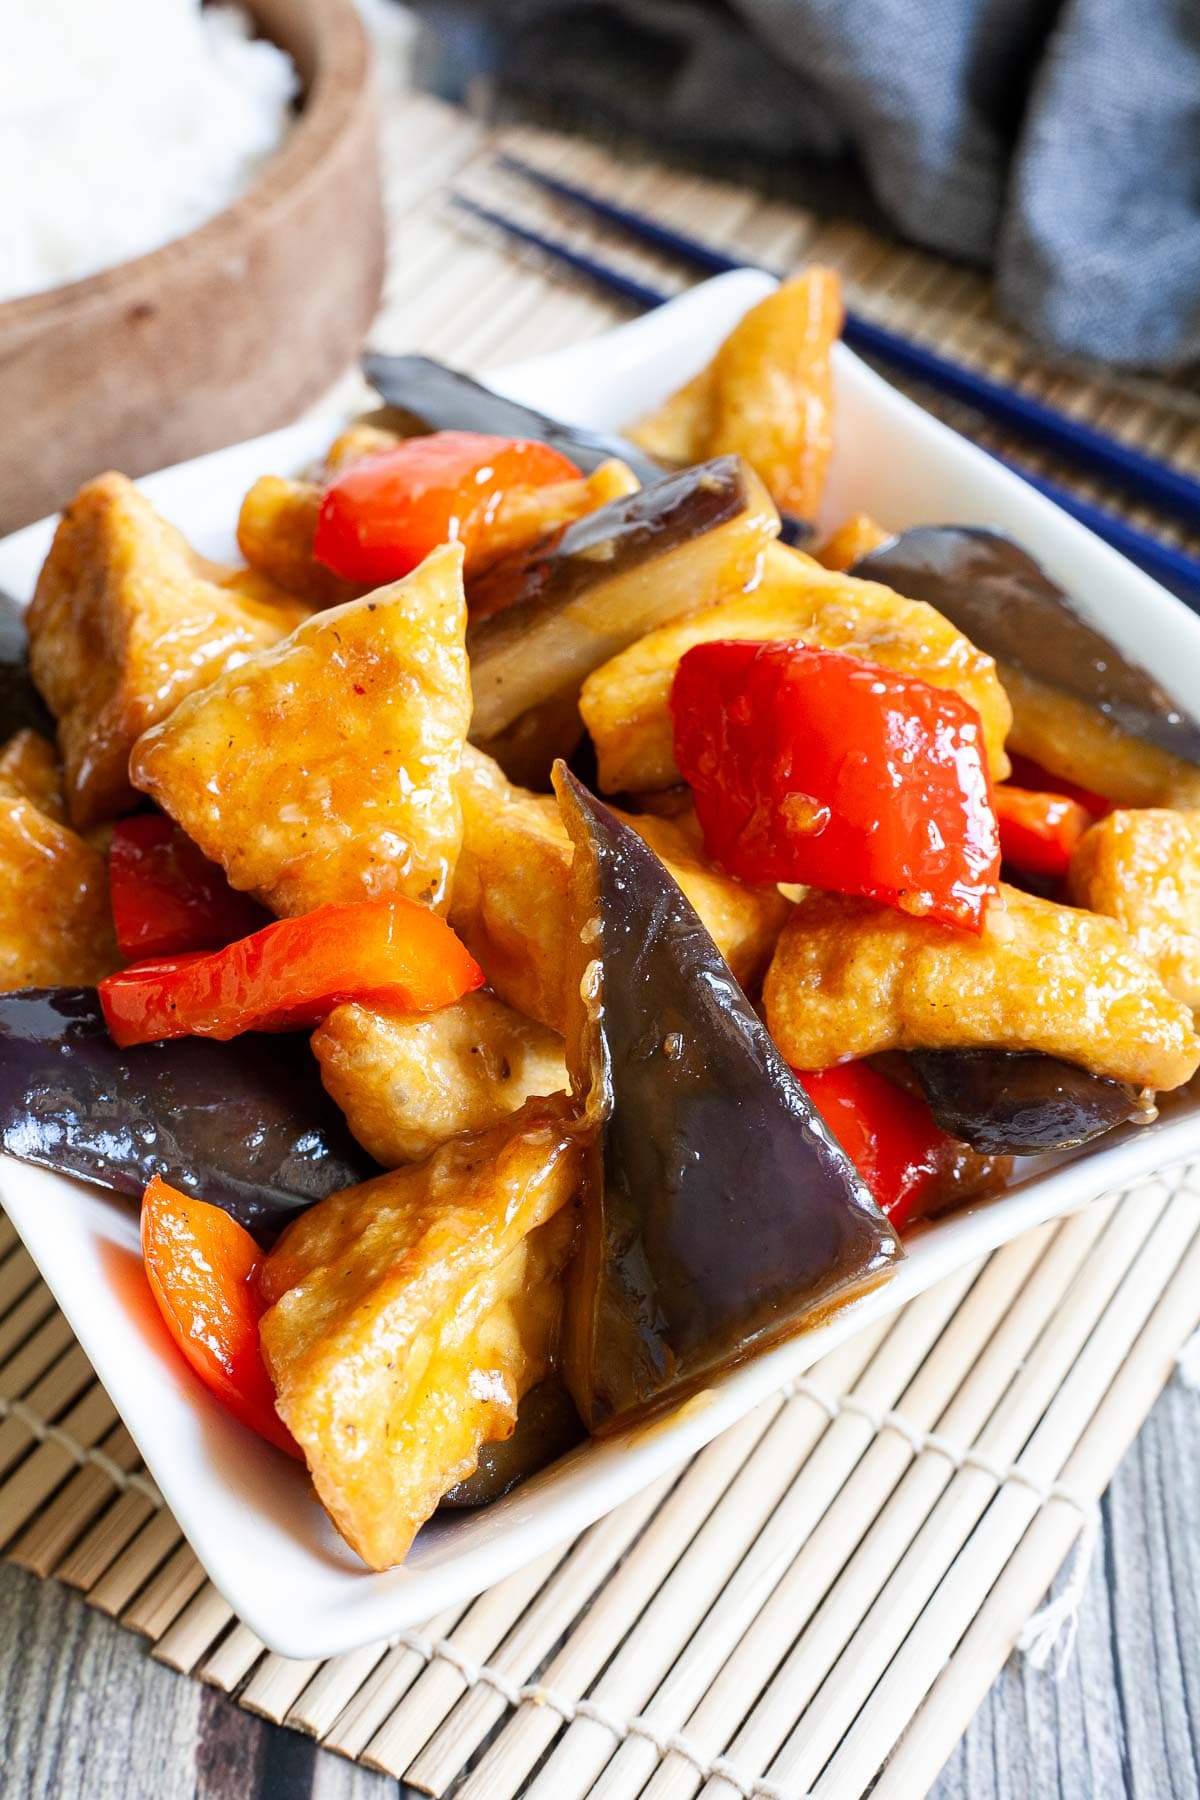 White rectangular plate full of large purple eggplant chunks, puffy brown glazed tofu and red peppers. Rice is served in a wooden bowl next to it.